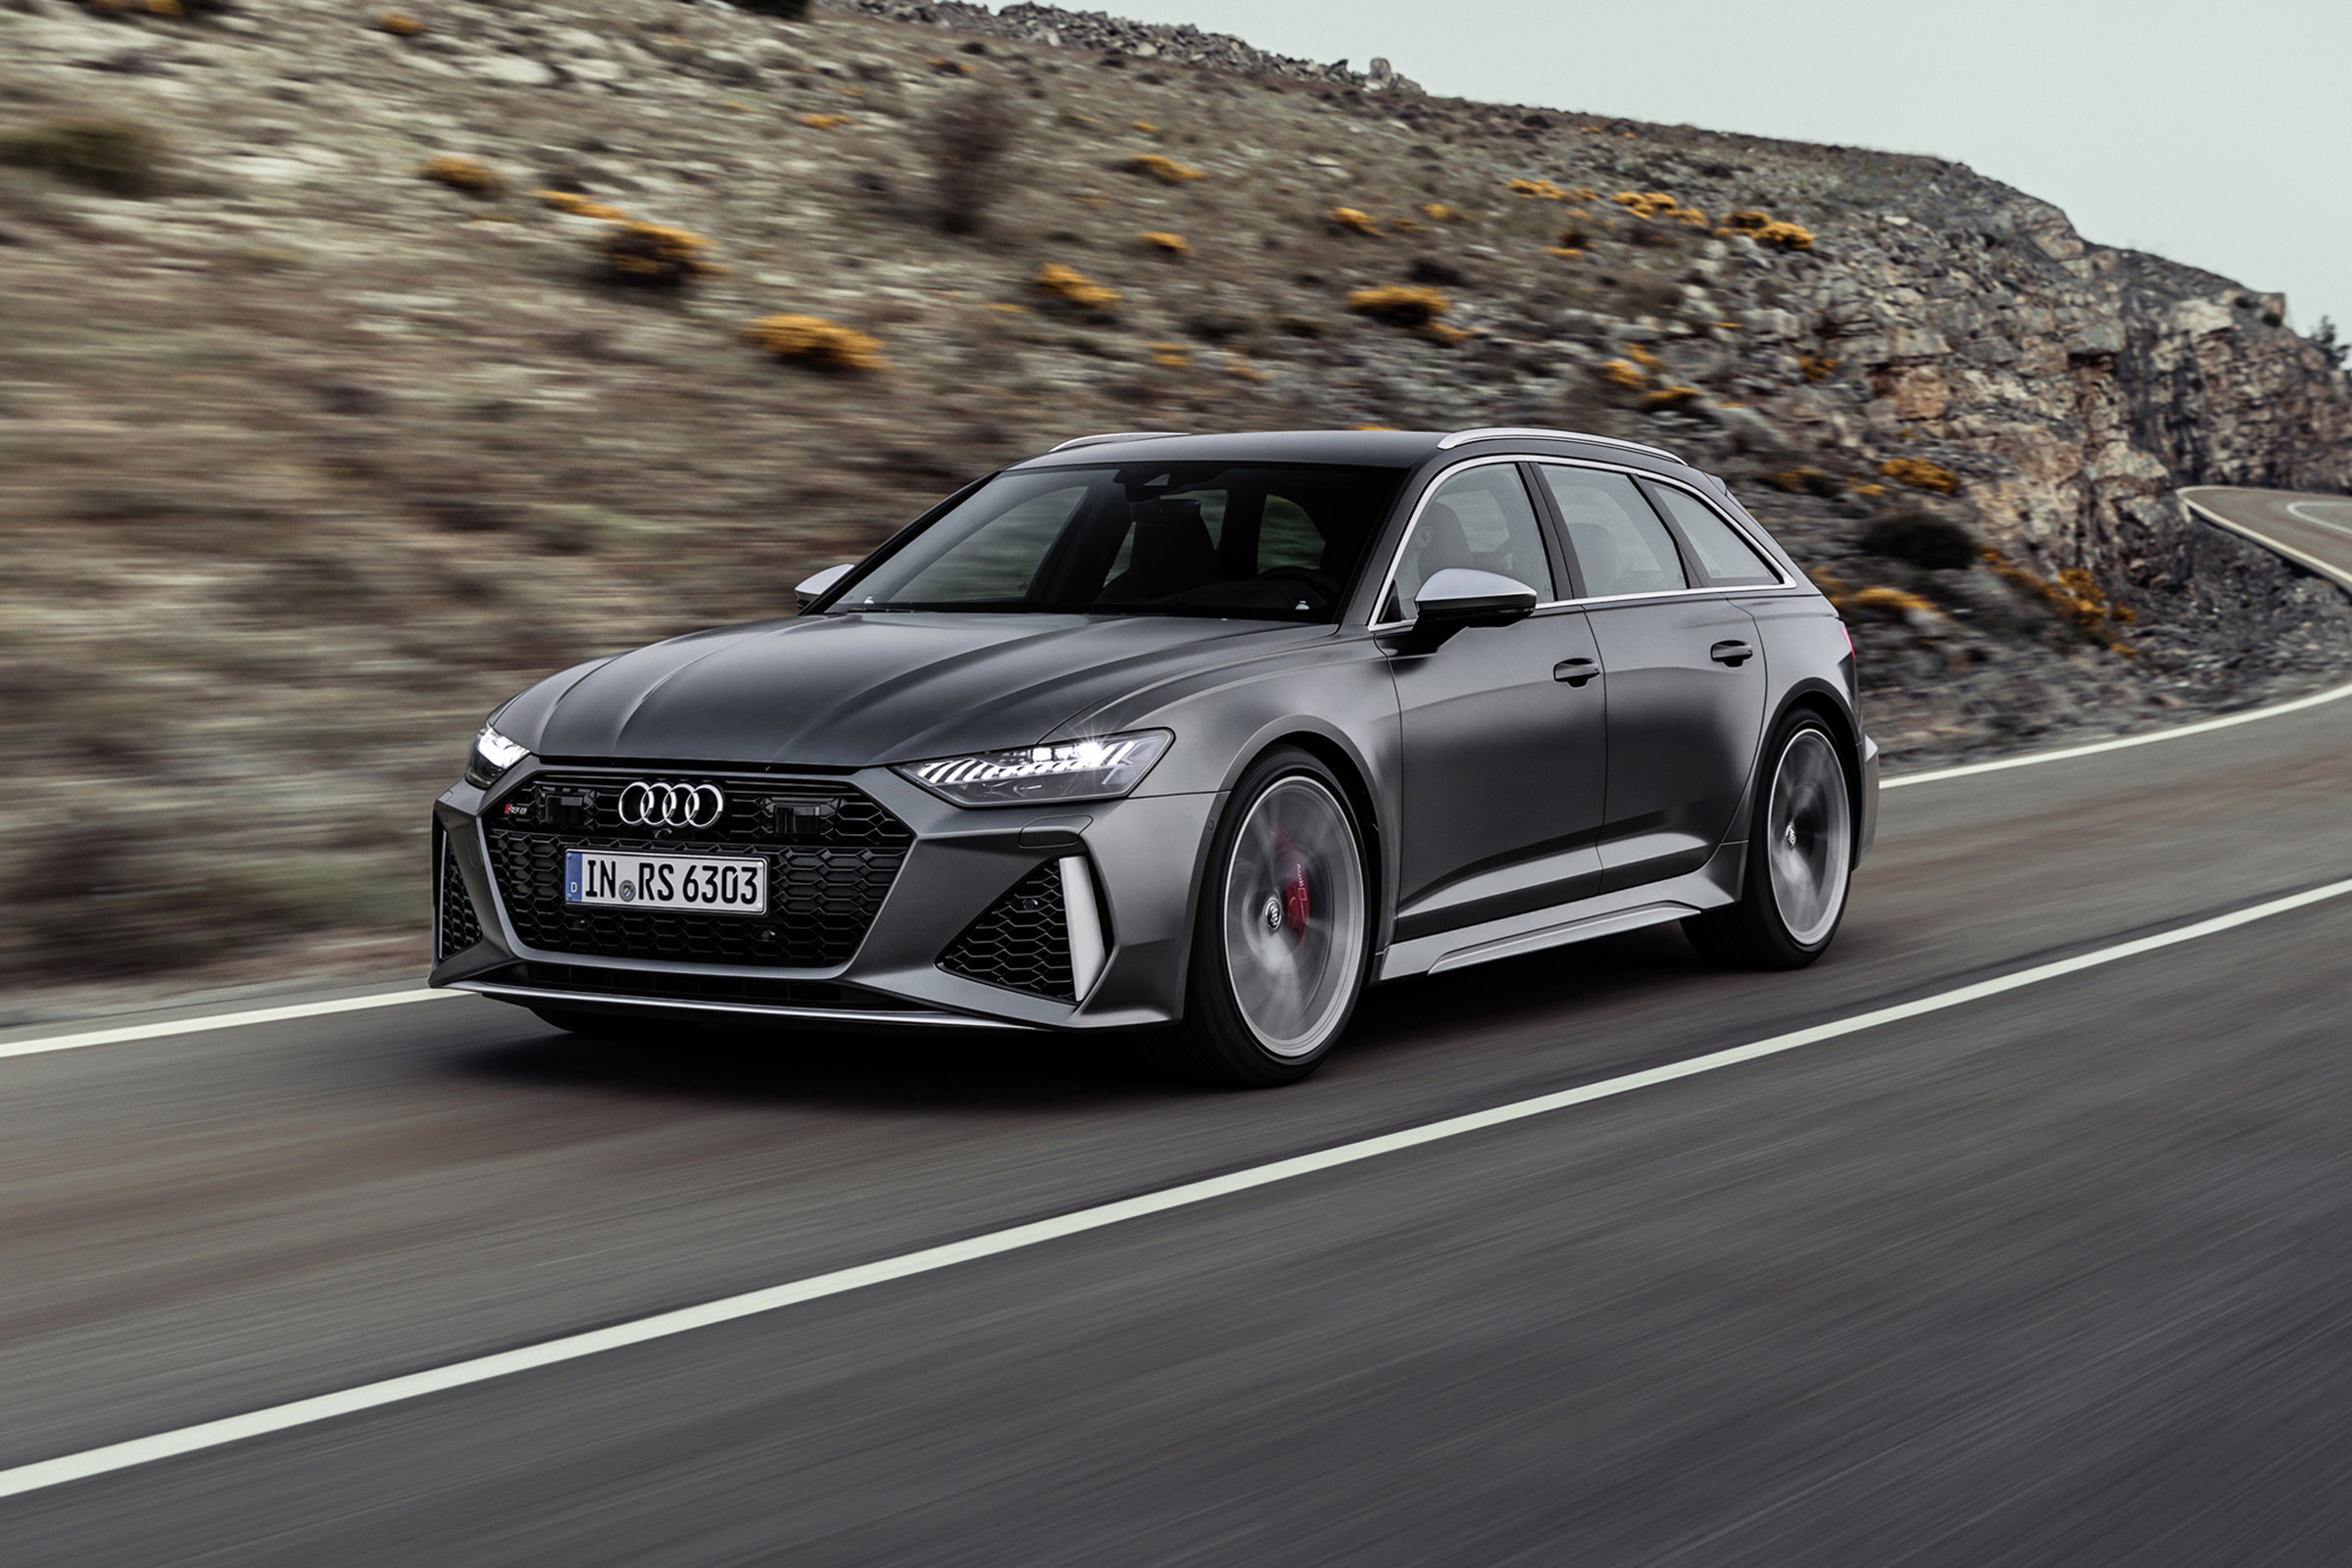 New Audi RS6 Avant prices, specs and release date Carbuyer